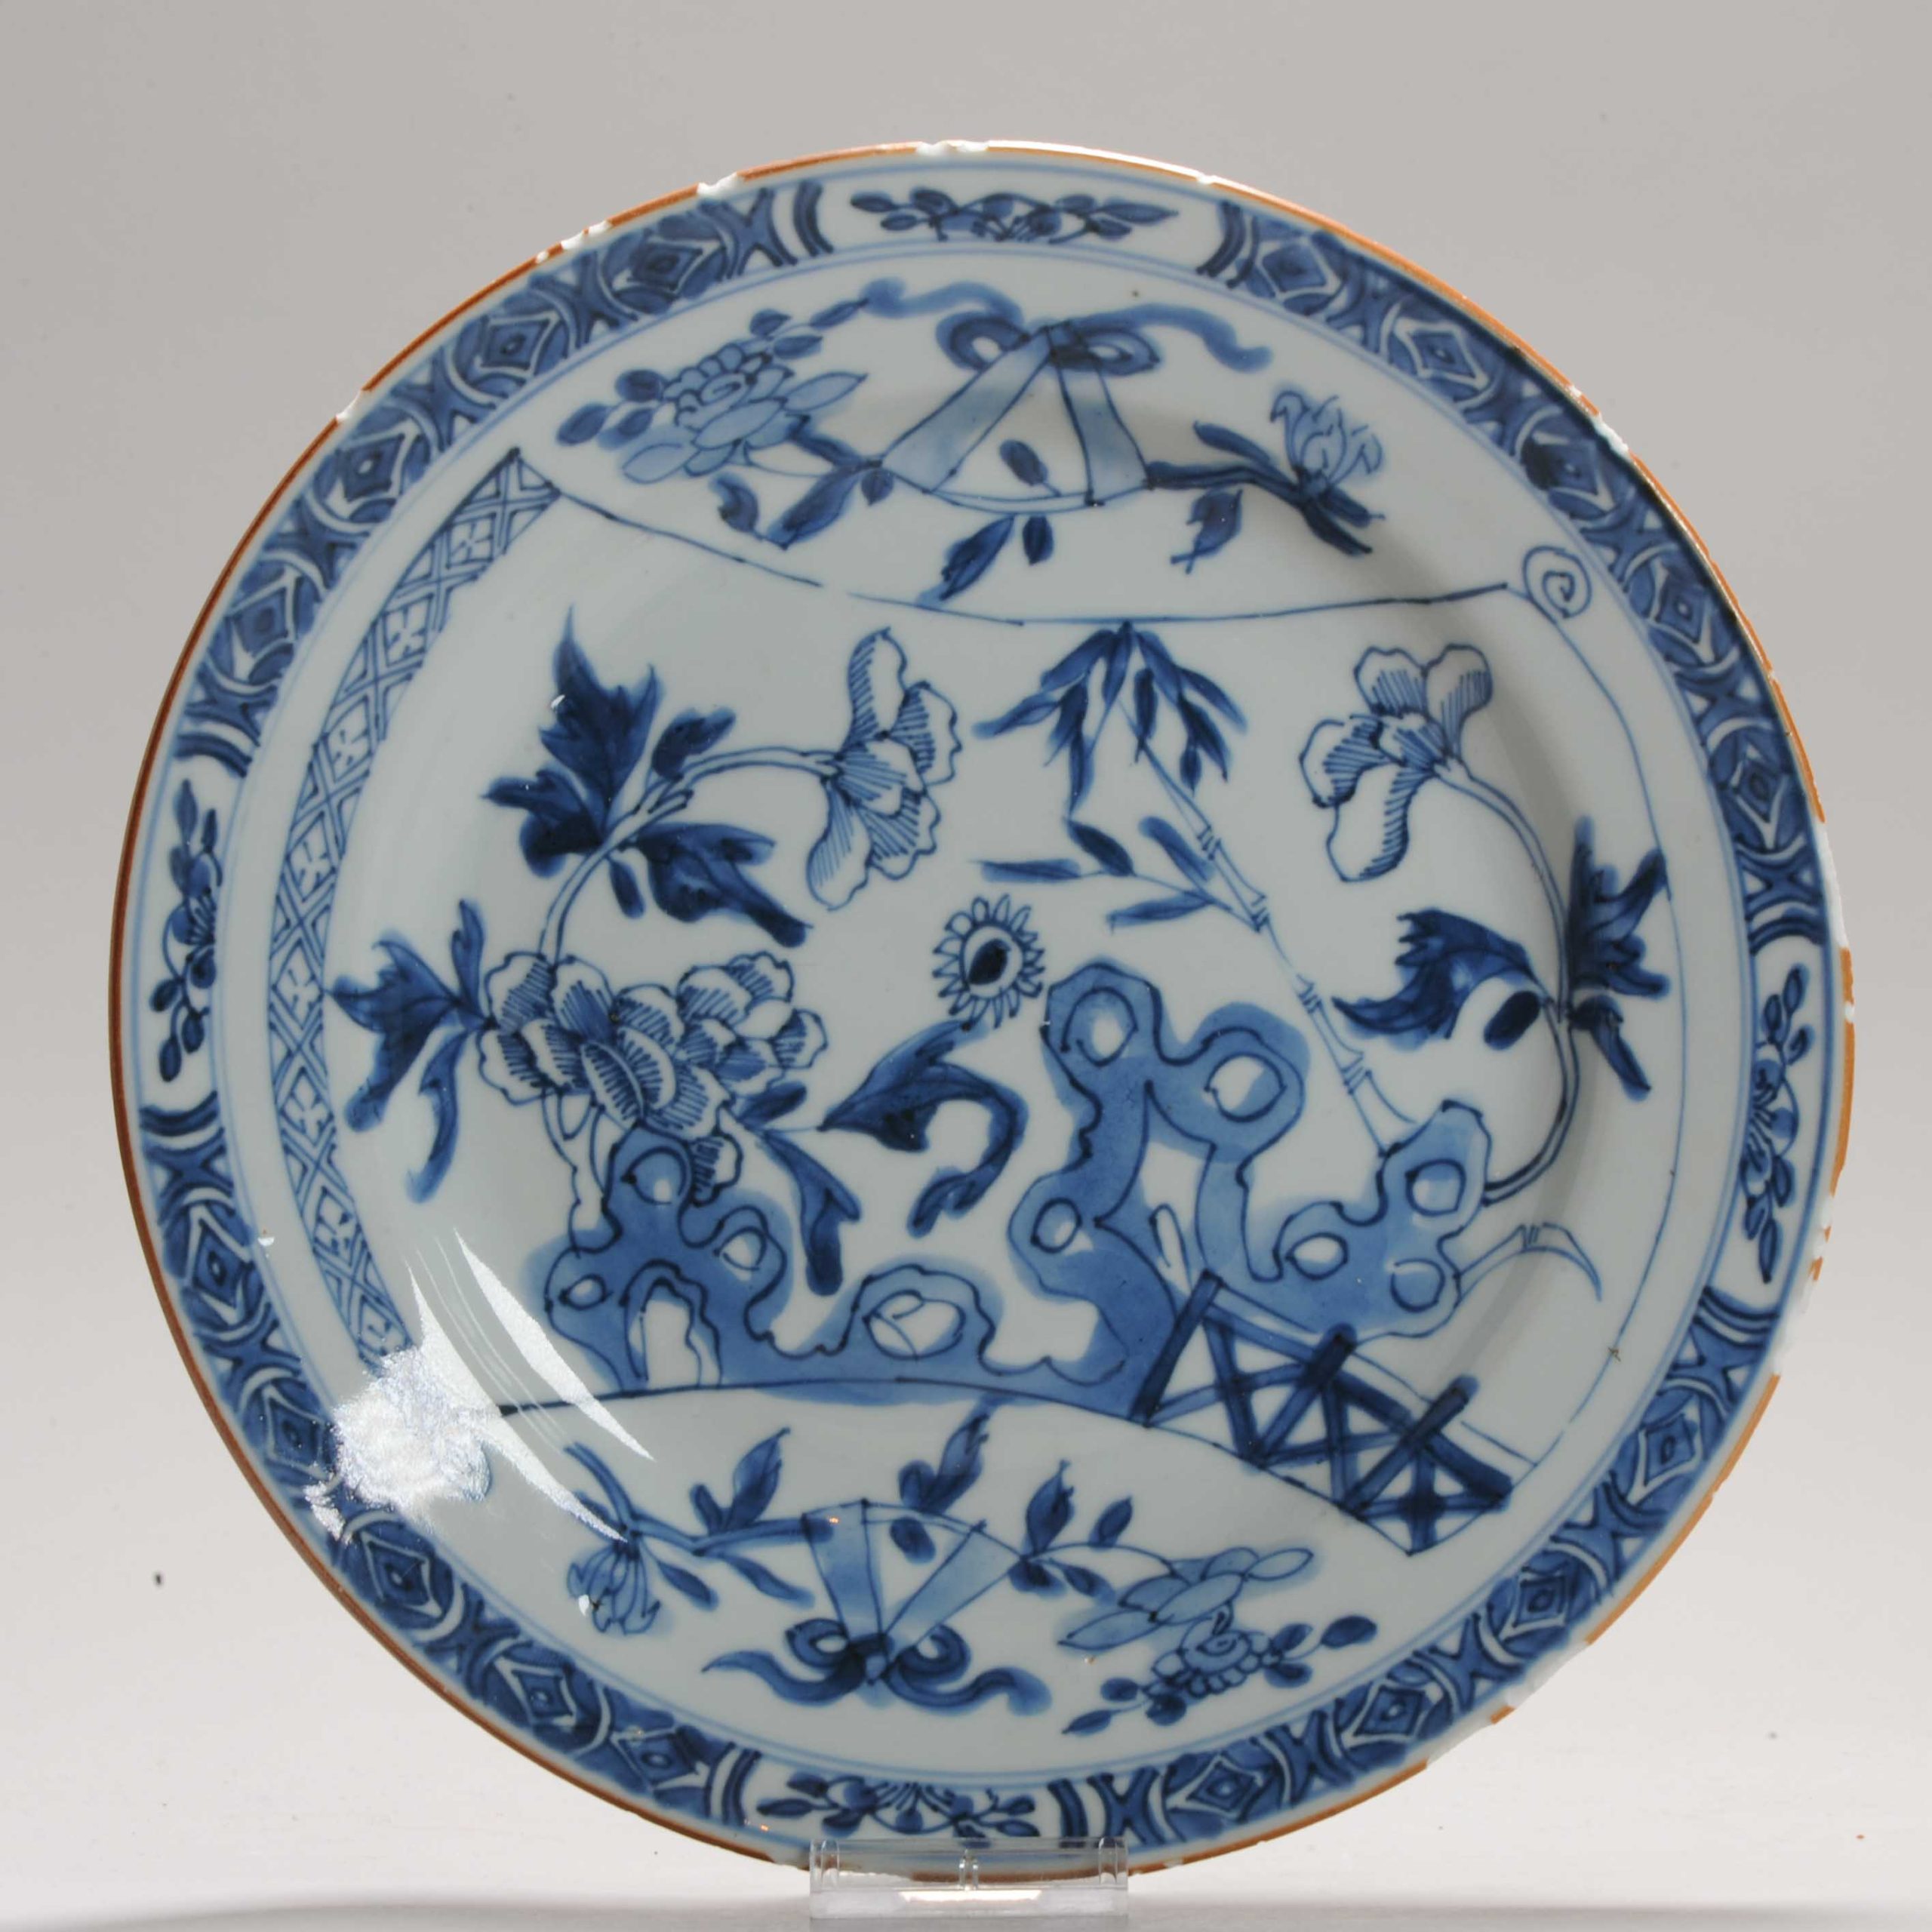 Antique Plate 18th Century Chinese Porcelain Blue and White Plate Kangxi Period